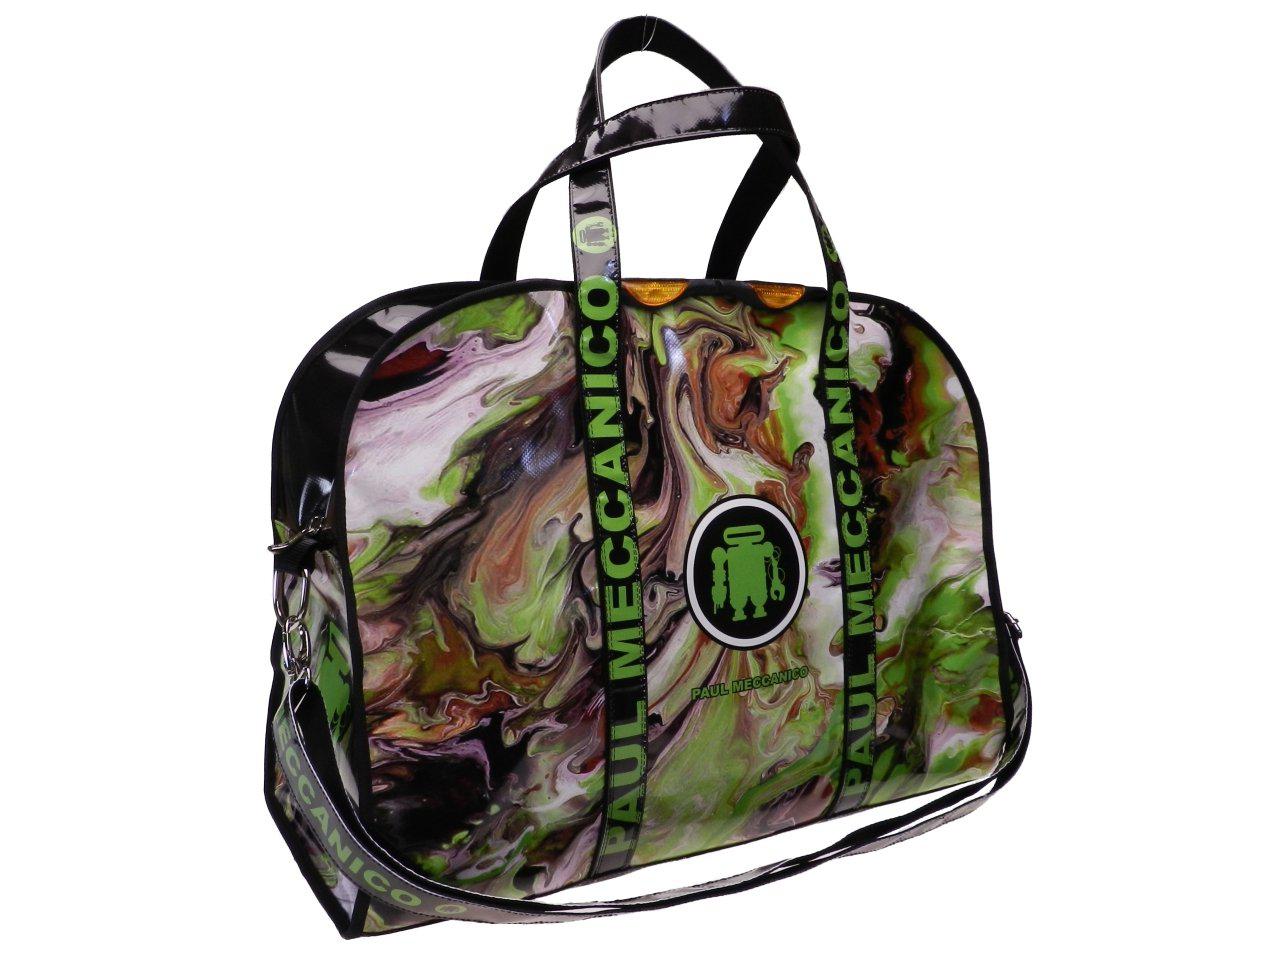 LARGE TRAVEL OR SPORTS BAG GREEN WITH CAMOUFLAGE FANTASY. MODEL RAID MADE OF LORRY TARPAULIN. - Unique Pieces Paul Meccanico